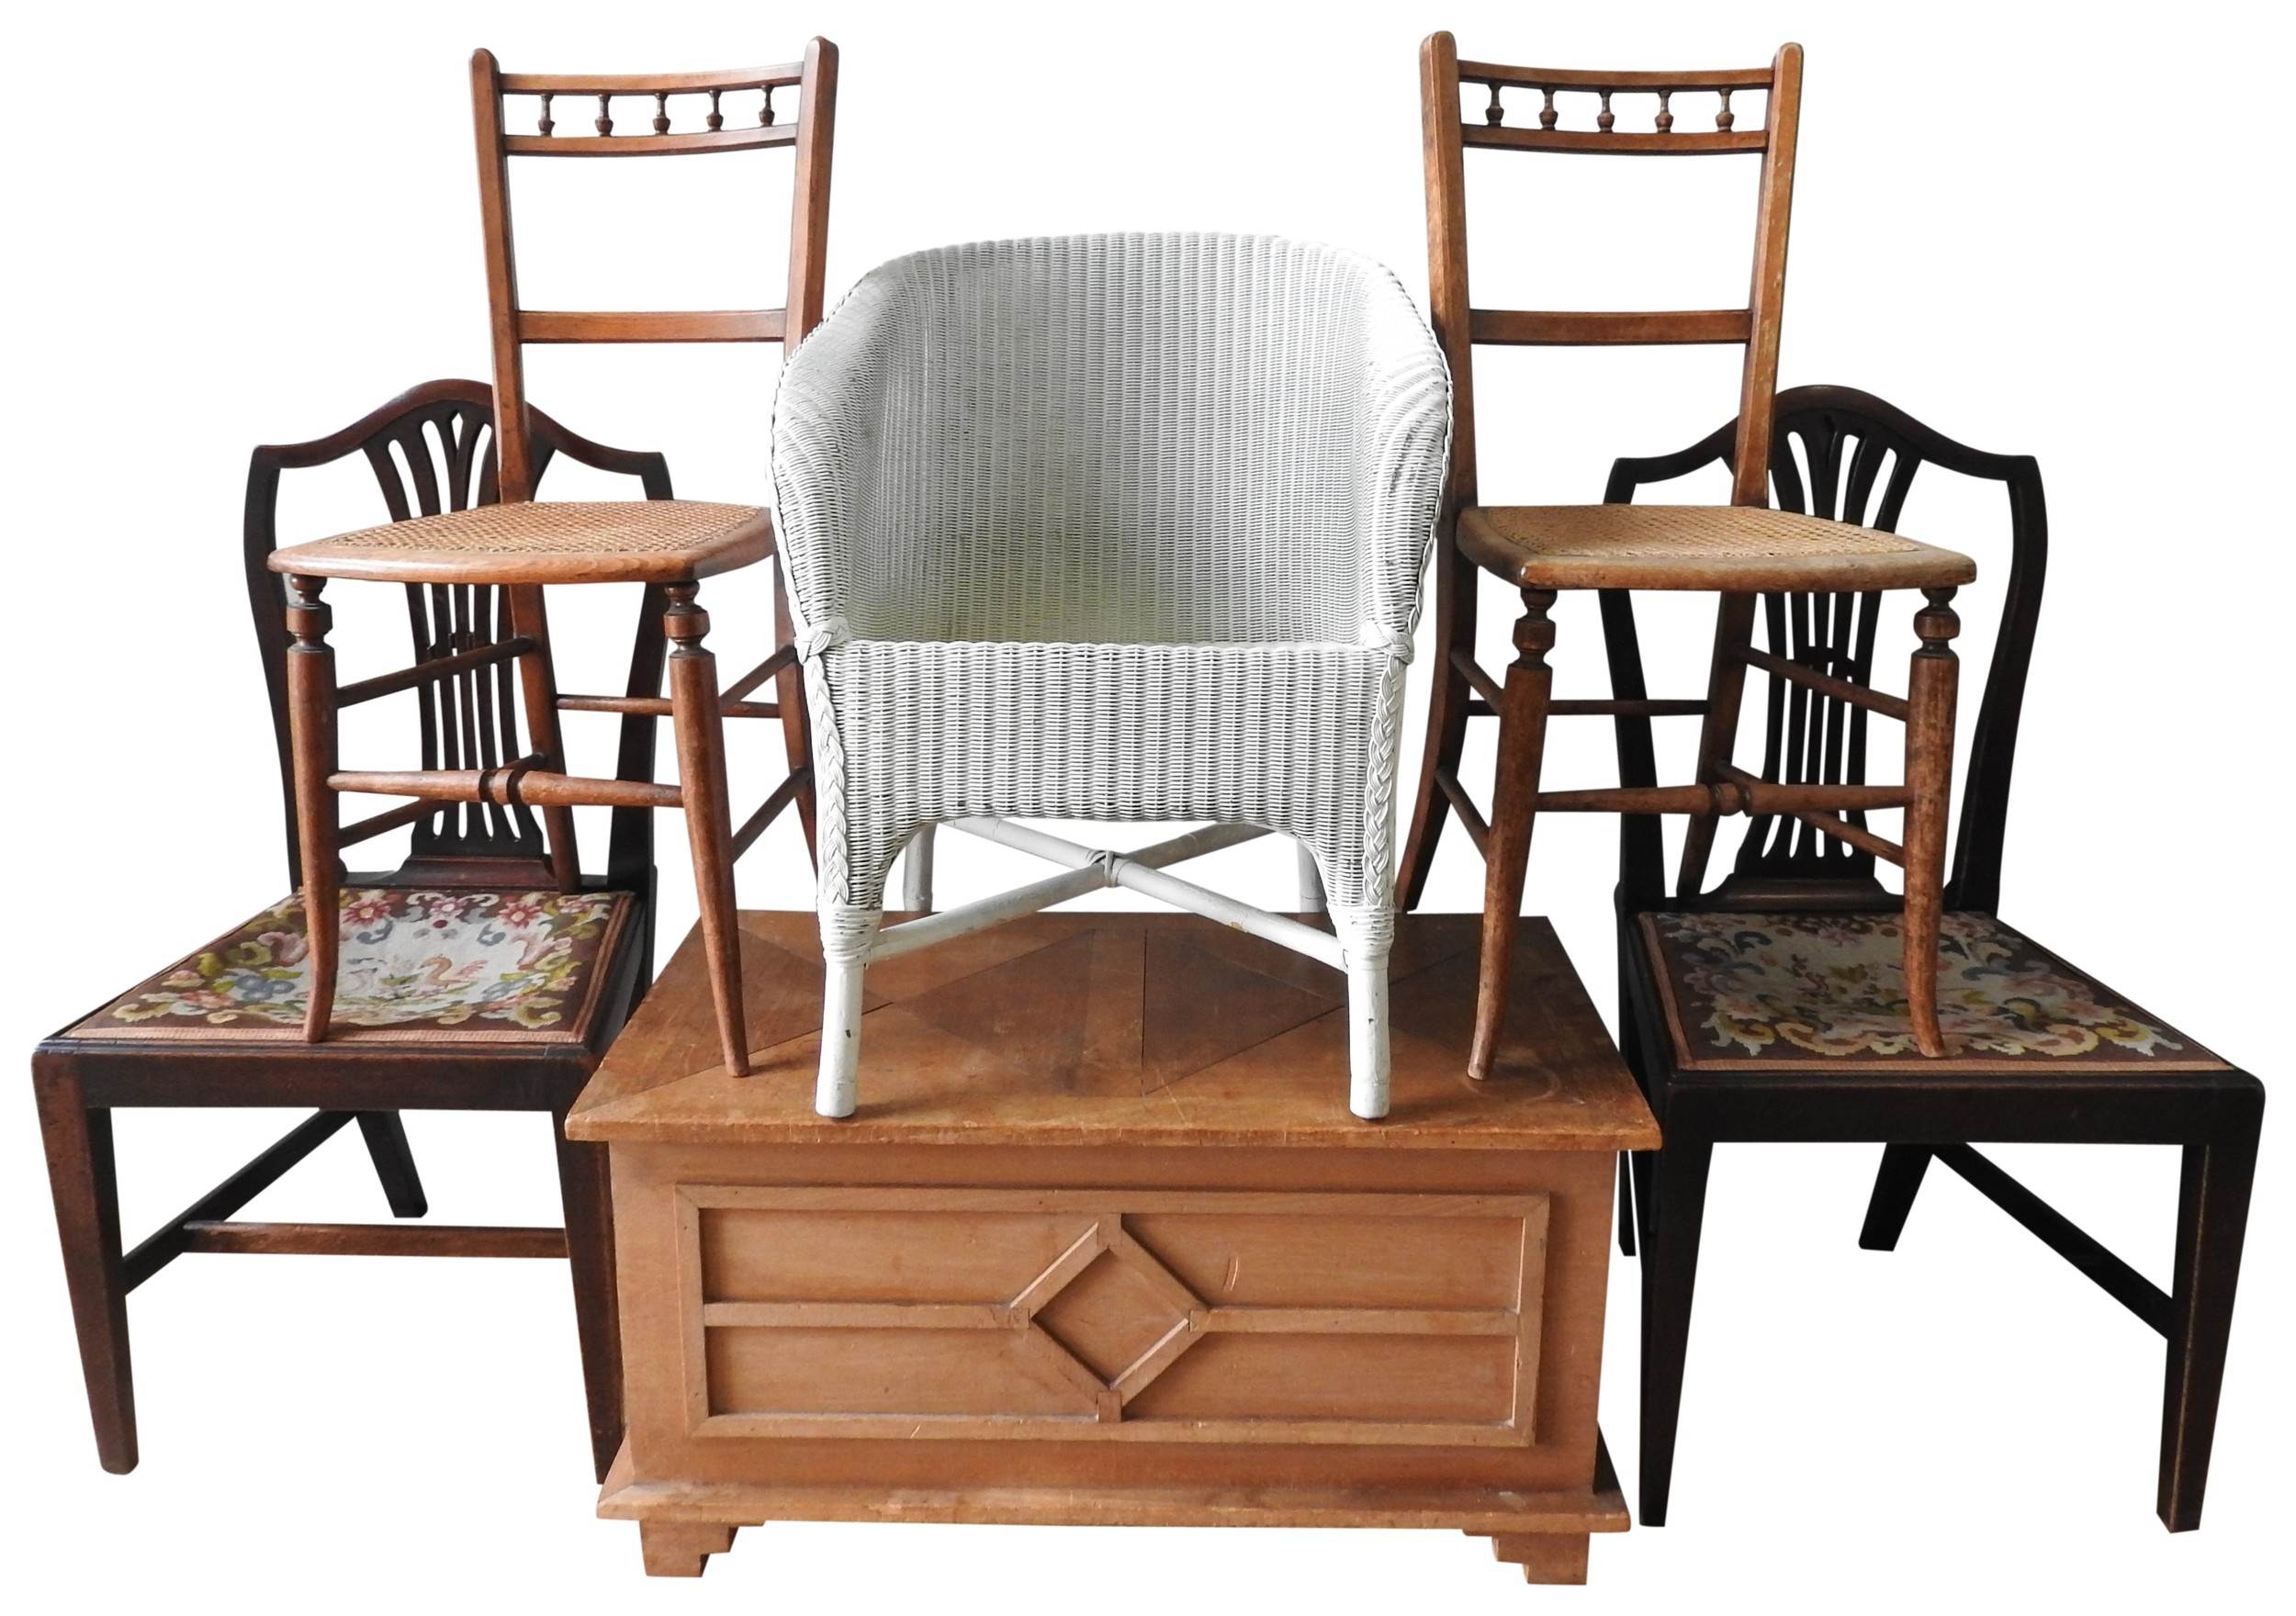 A WHITE LOOM BEDROOM CHAIR AND OAK PANELLED BLANKET BOX, along with a pair of cane seat chairs and a